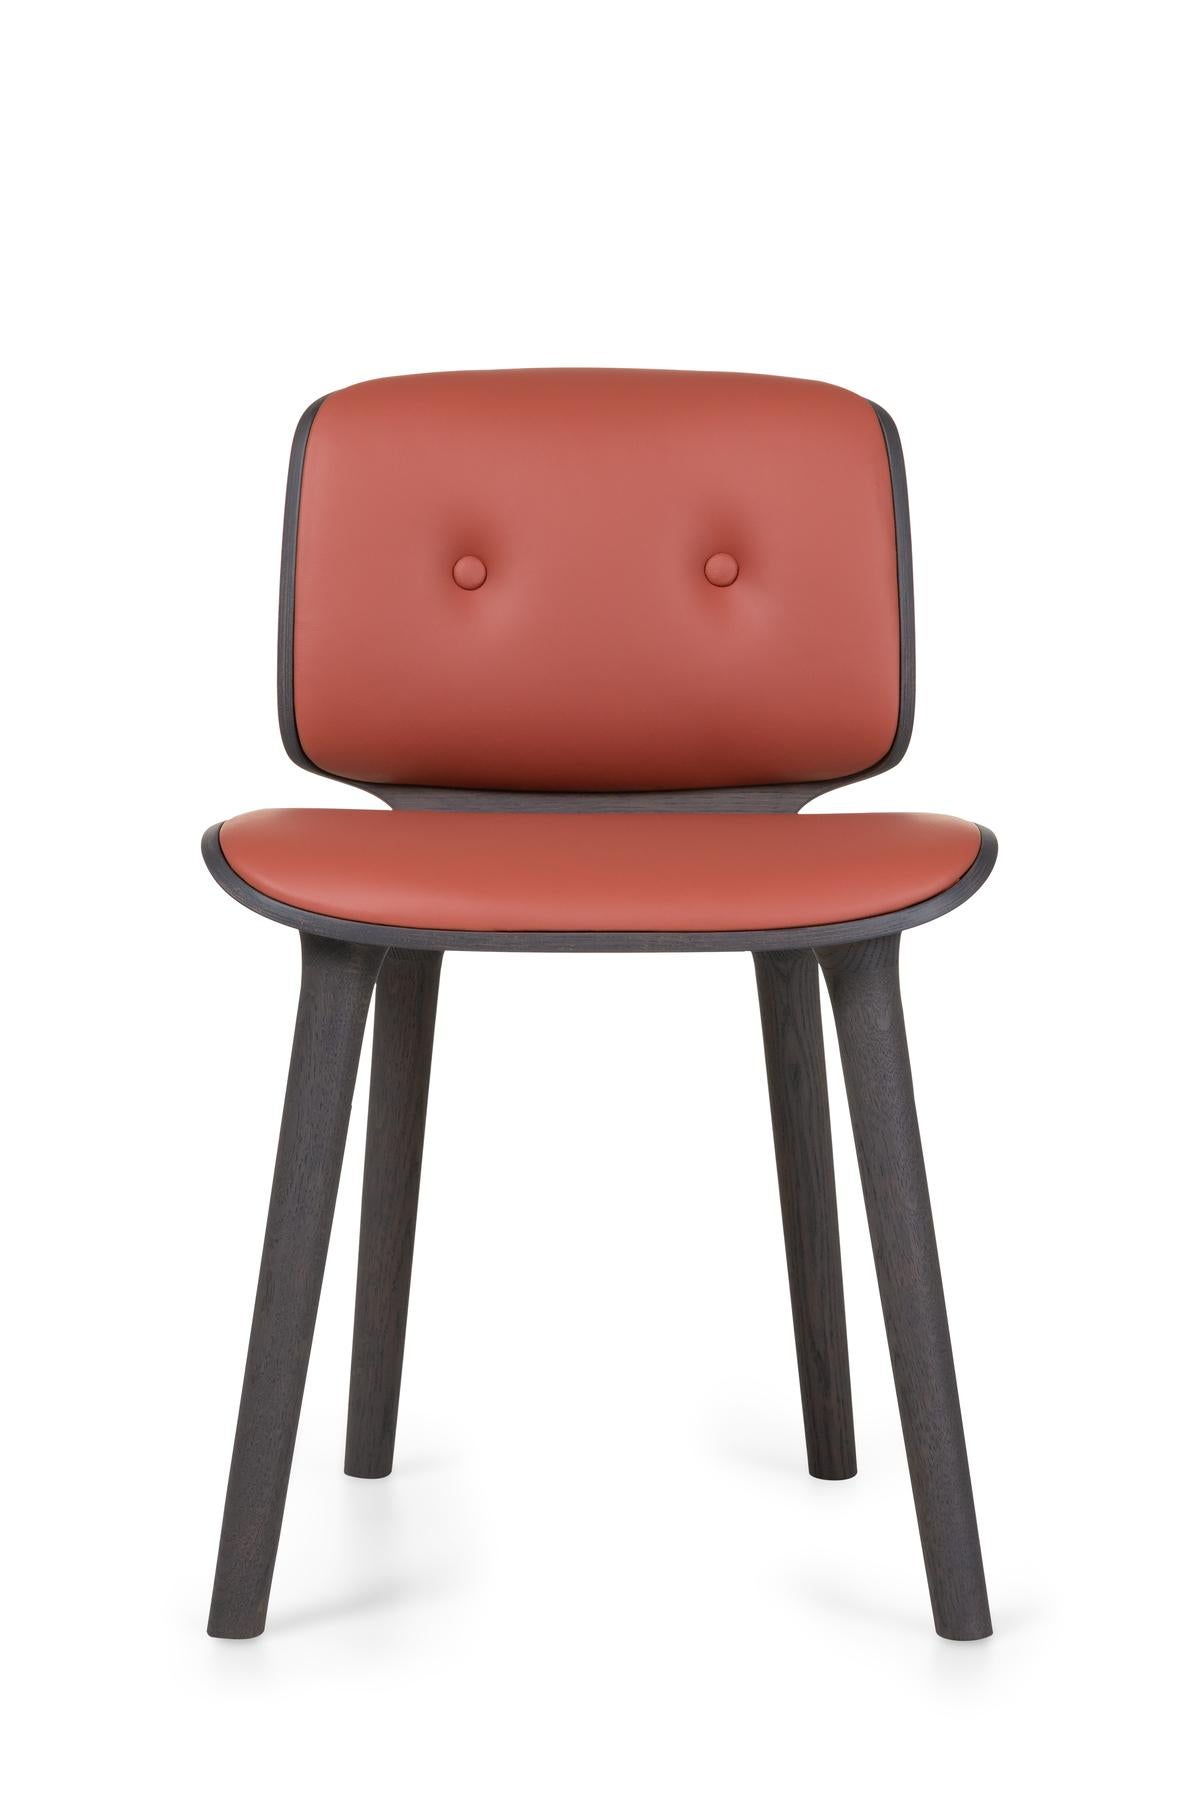 Modern Moooi Nut Dining Chair in Grey Stained Oak & Spectrum Red Brown 30172 Upholstery For Sale